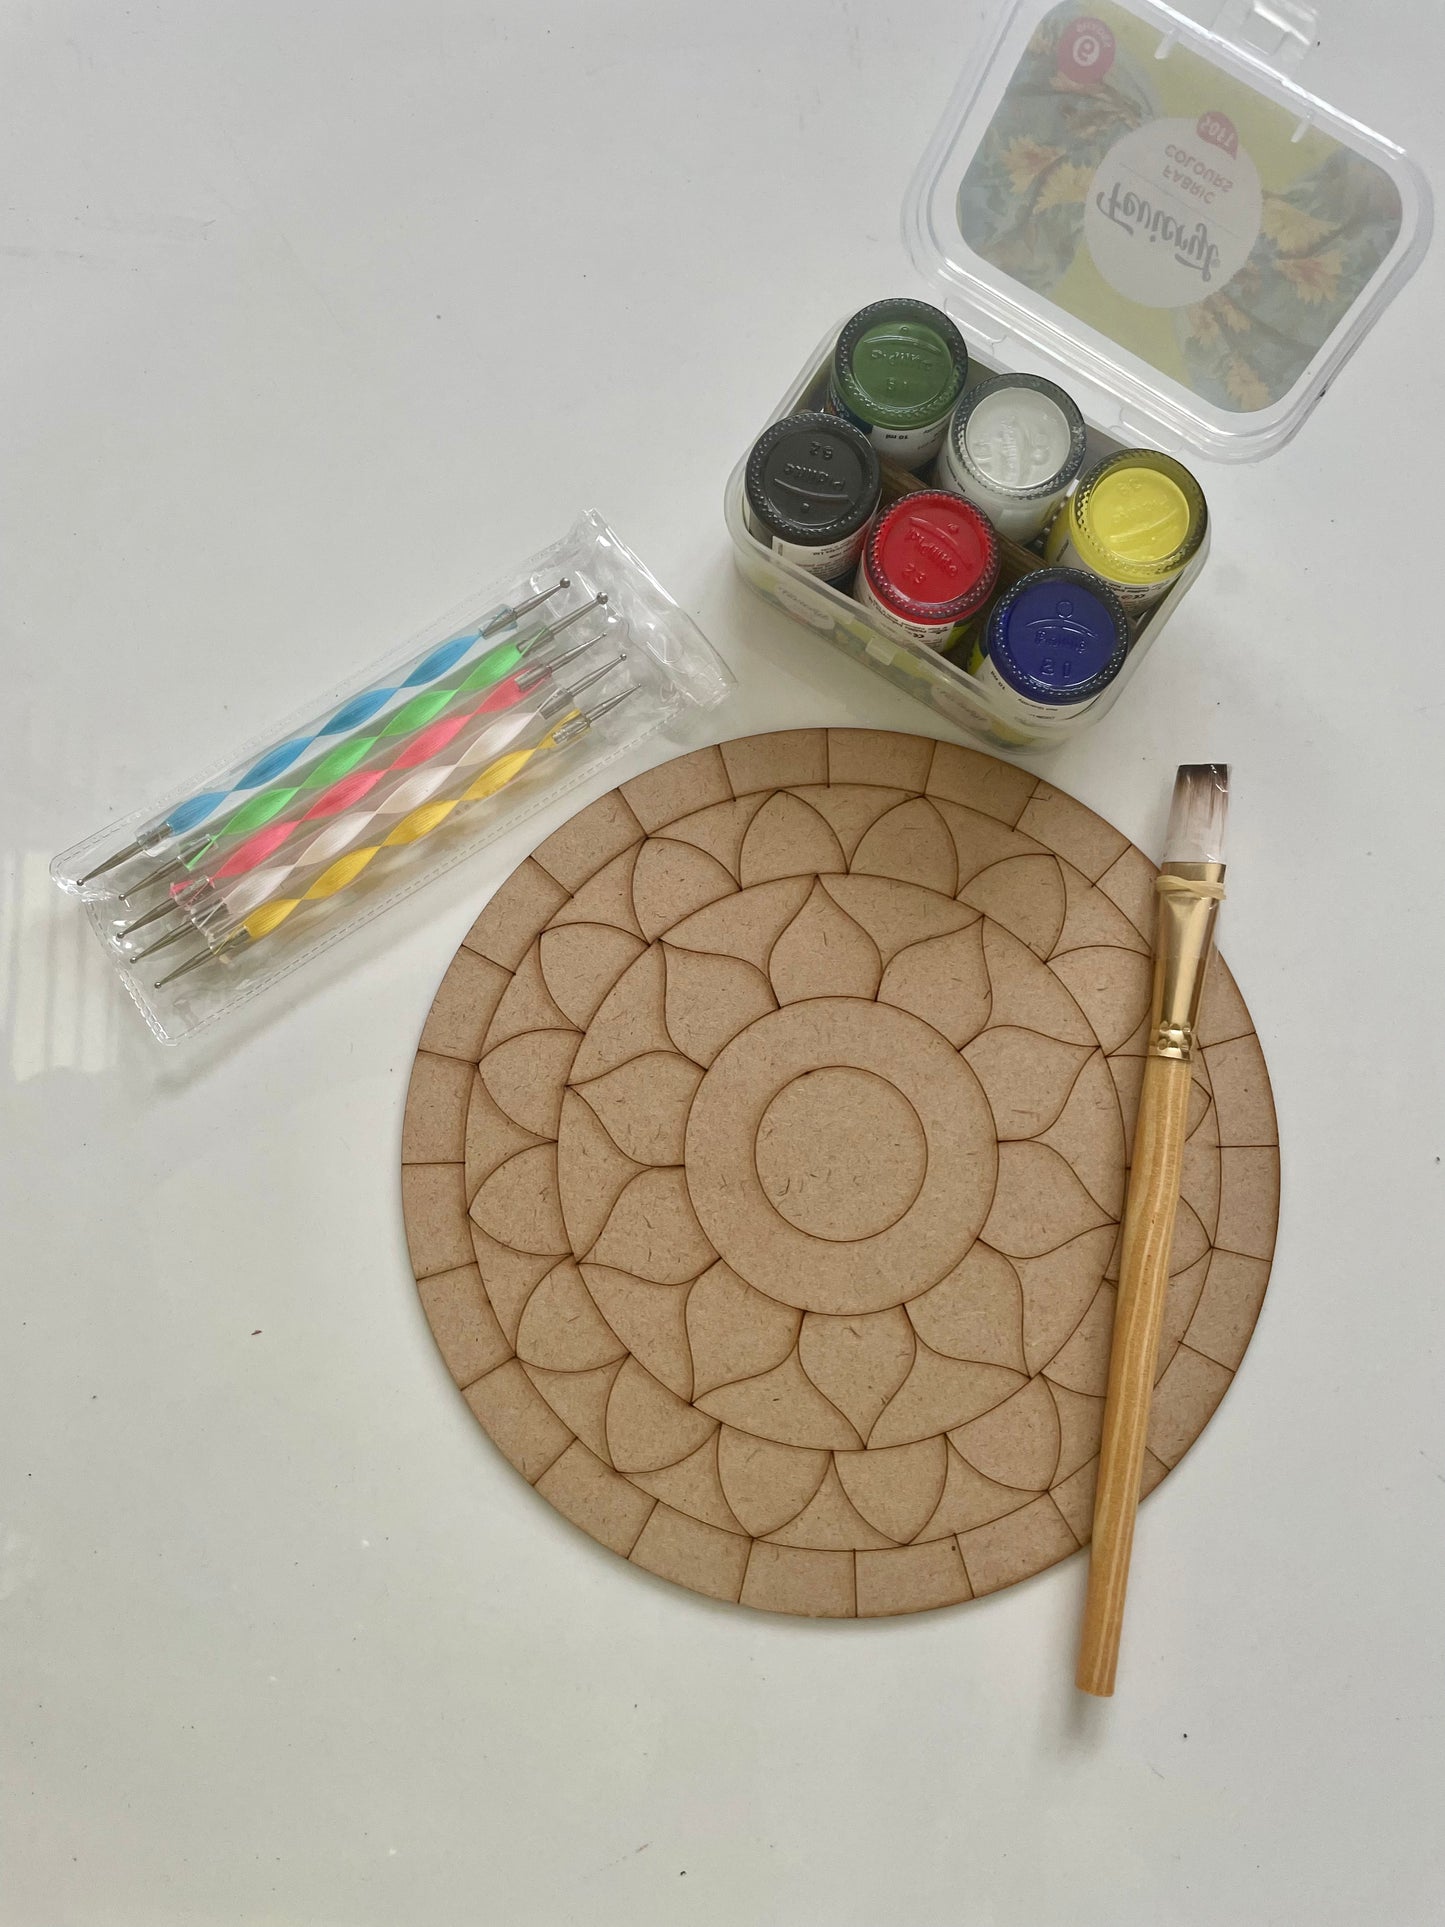 Paint Cafe Mandala dot painting pre marked art kit includes 8inch mdf board, paint, brush, dot tools.